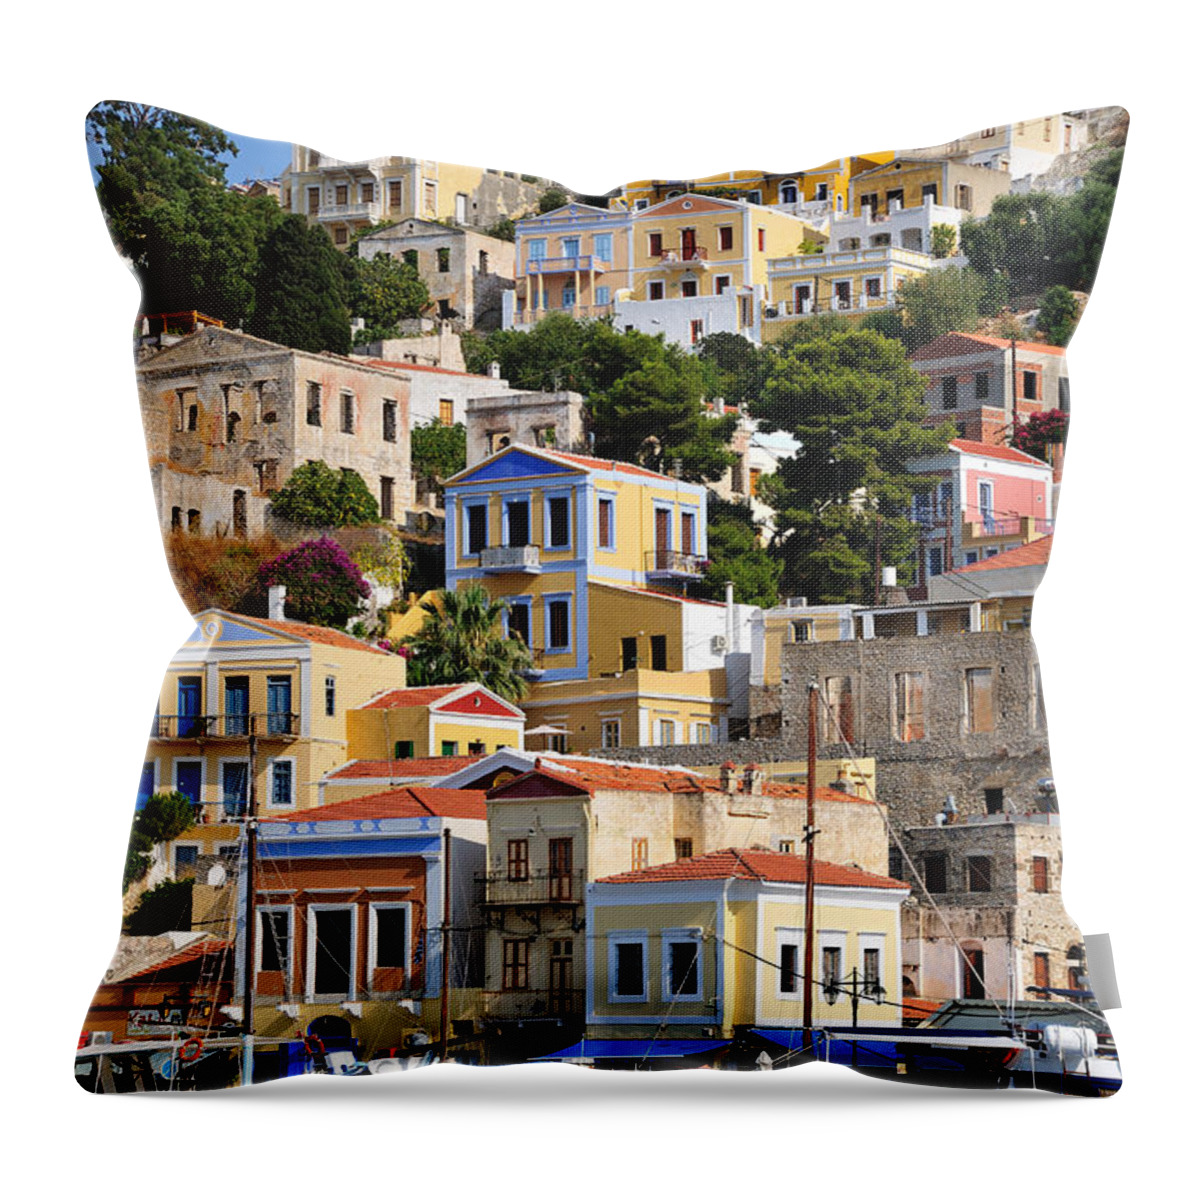 Symi Throw Pillow featuring the photograph Colorful Symi #7 by George Atsametakis